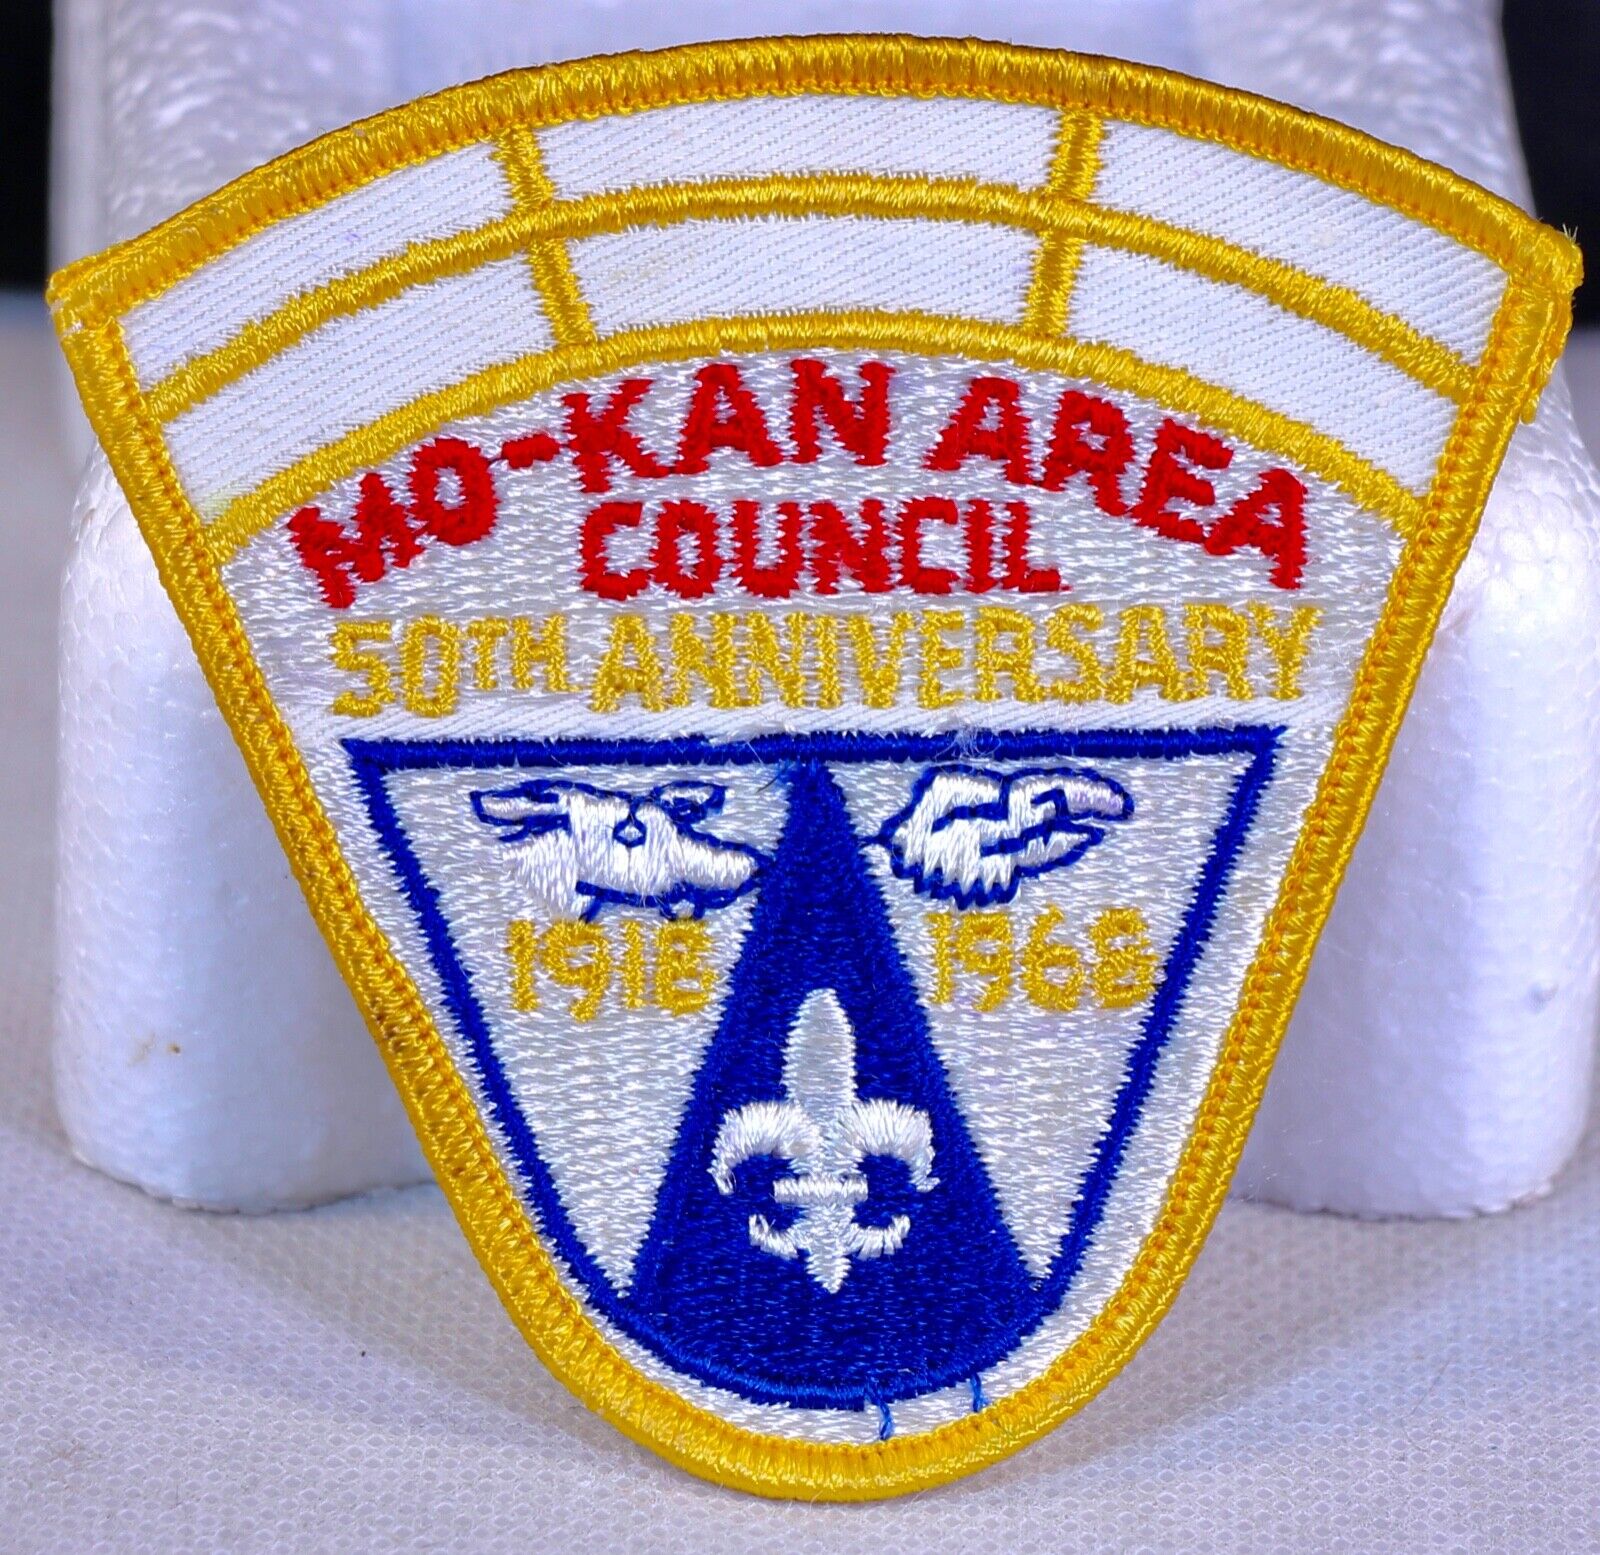 MO-KAN Area Council 50th Anniversary 1918-1968 Boy Scout Patch 